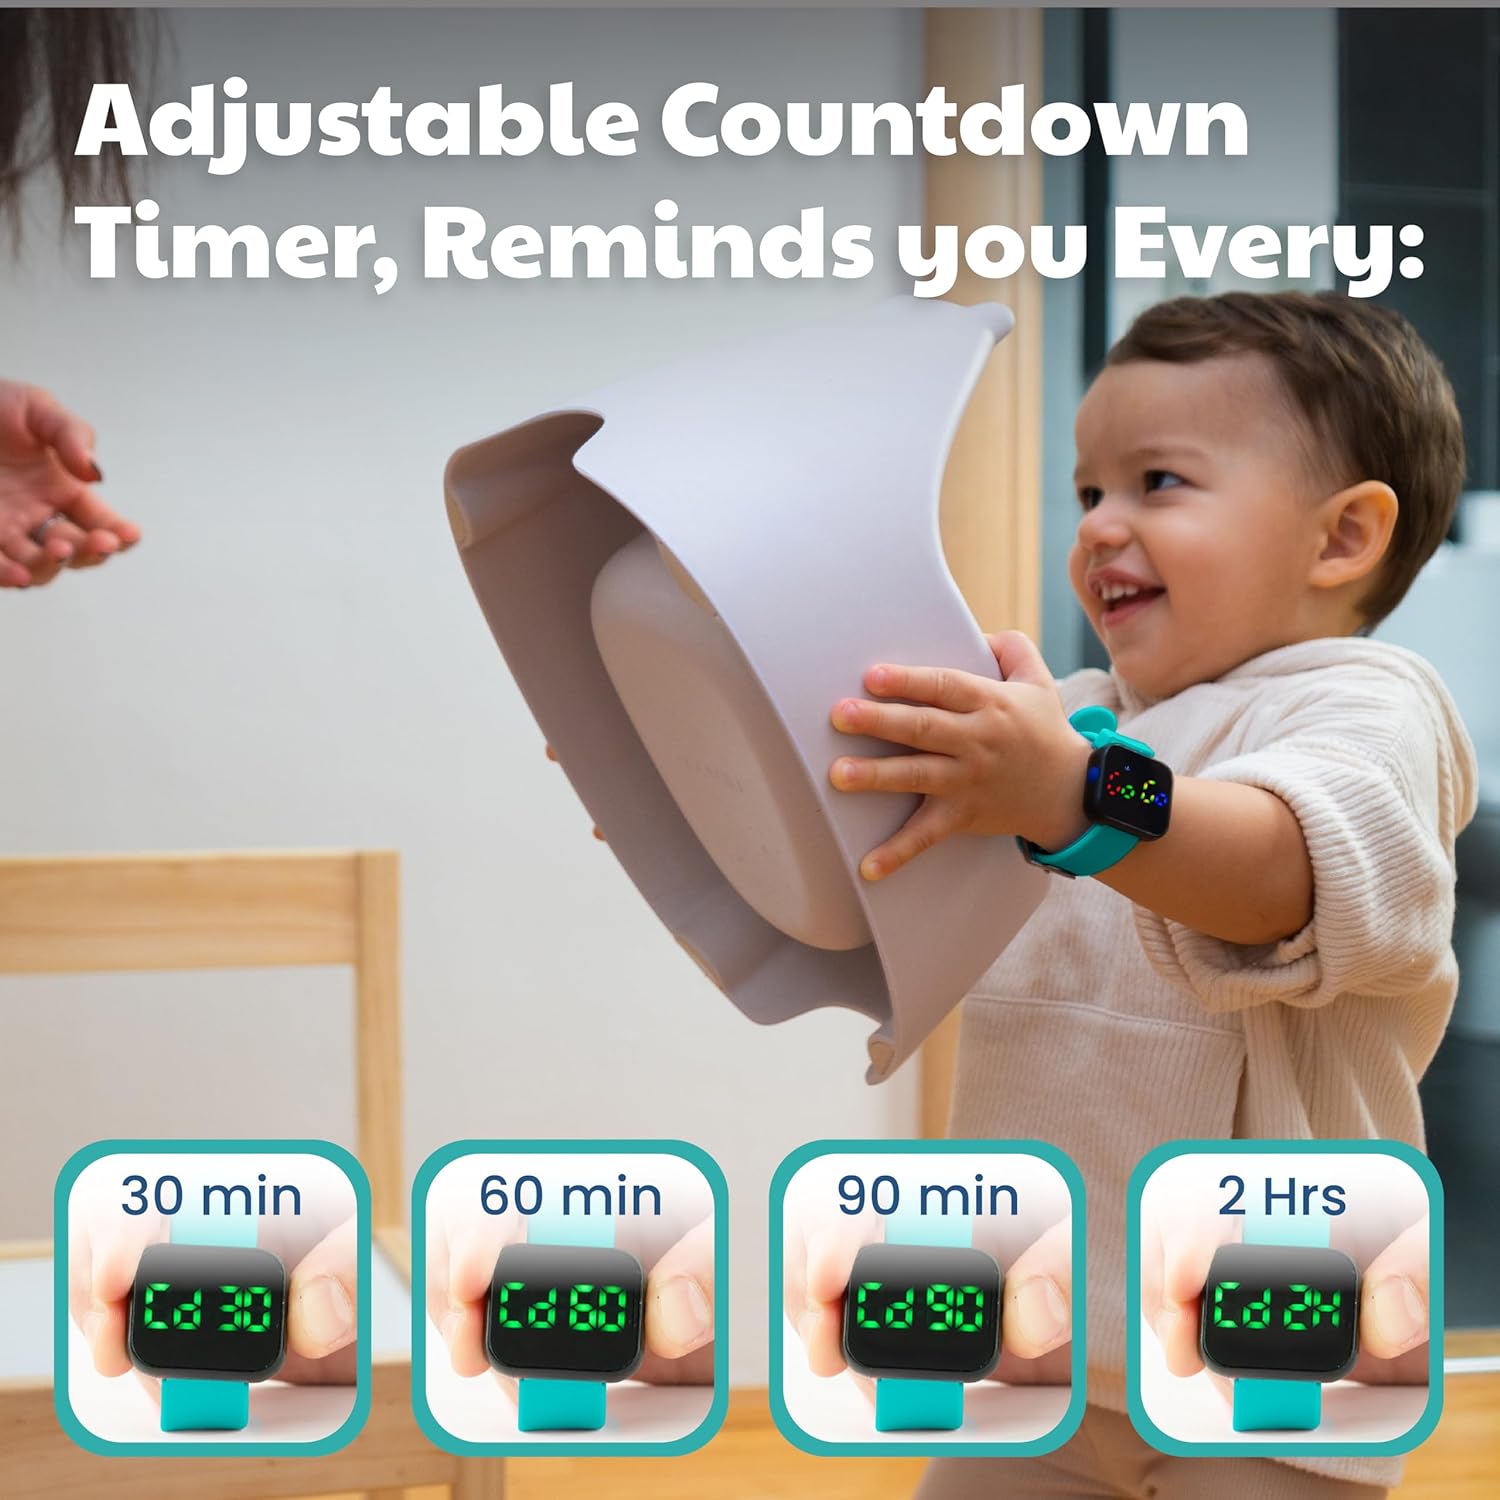 Potty Training Watch & Board Book for Kids - Turquoise